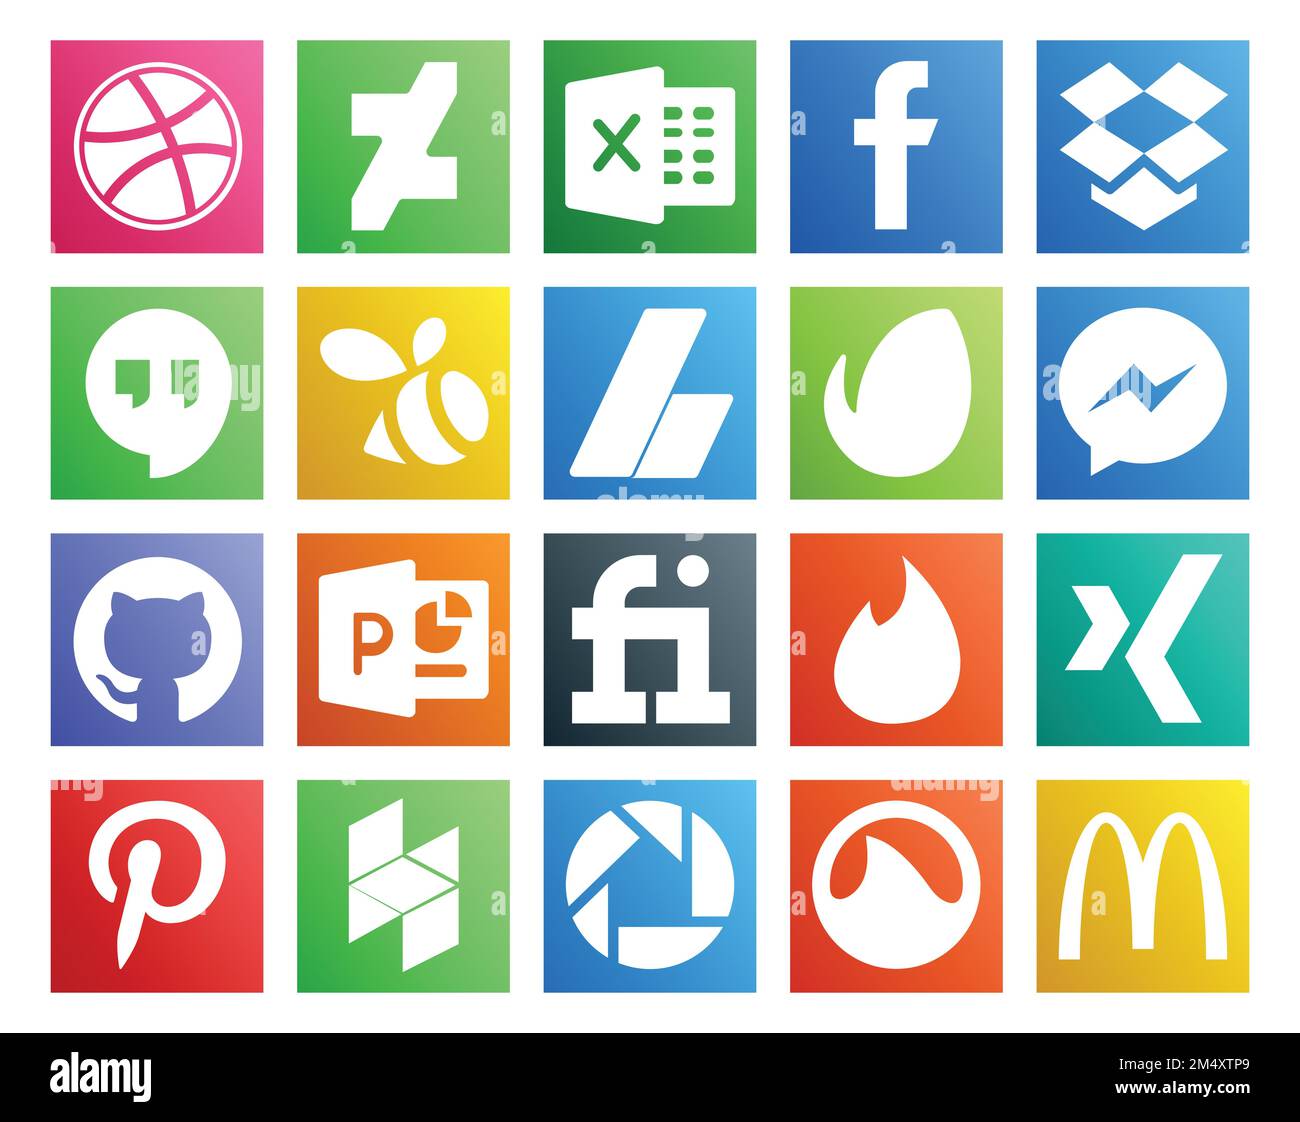 20 Social Media Icon Pack Including houzz. xing. ads. tinder. powerpoint Stock Vector